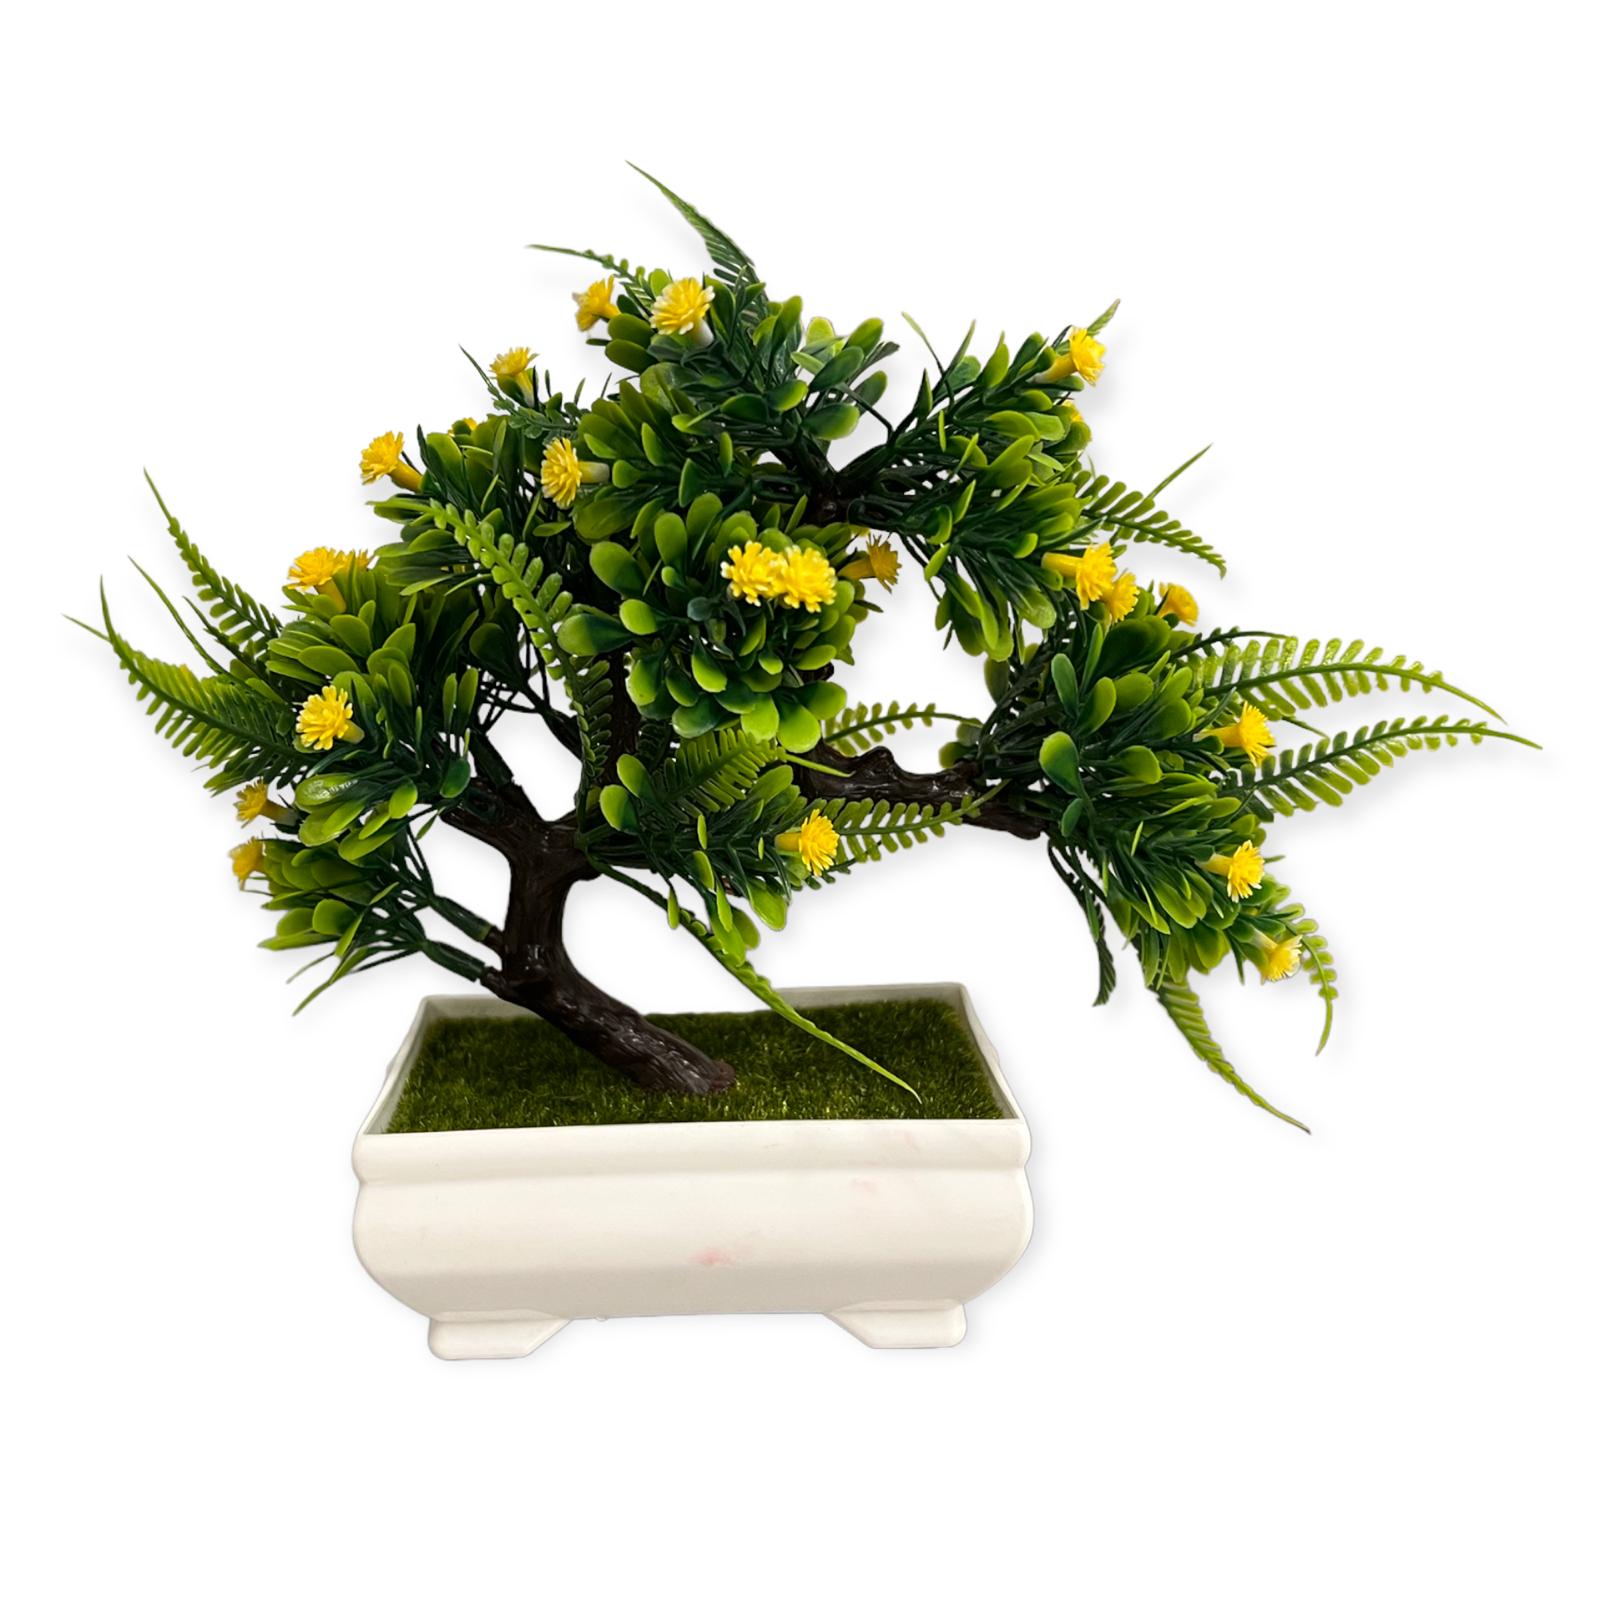 Artificial : Bonsai Different Colored Flowers Online on Sale from HnG Nursery for trees & plants